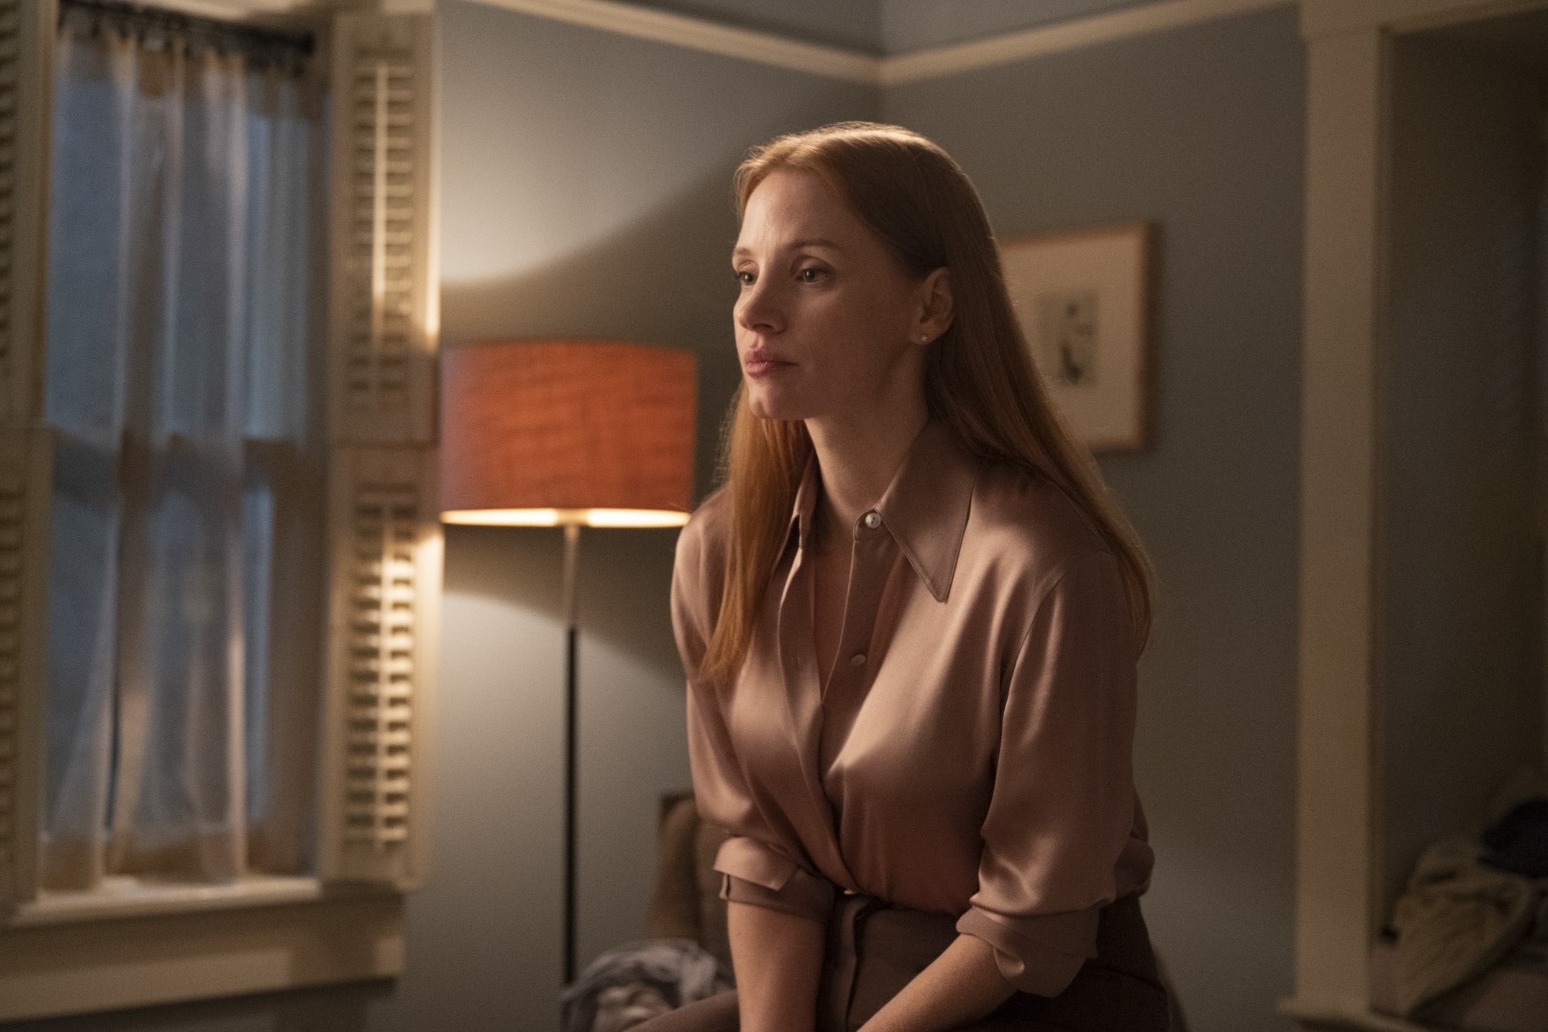 Jessica Chastain Important female spy film appeals to boys as well as girls thumbnail